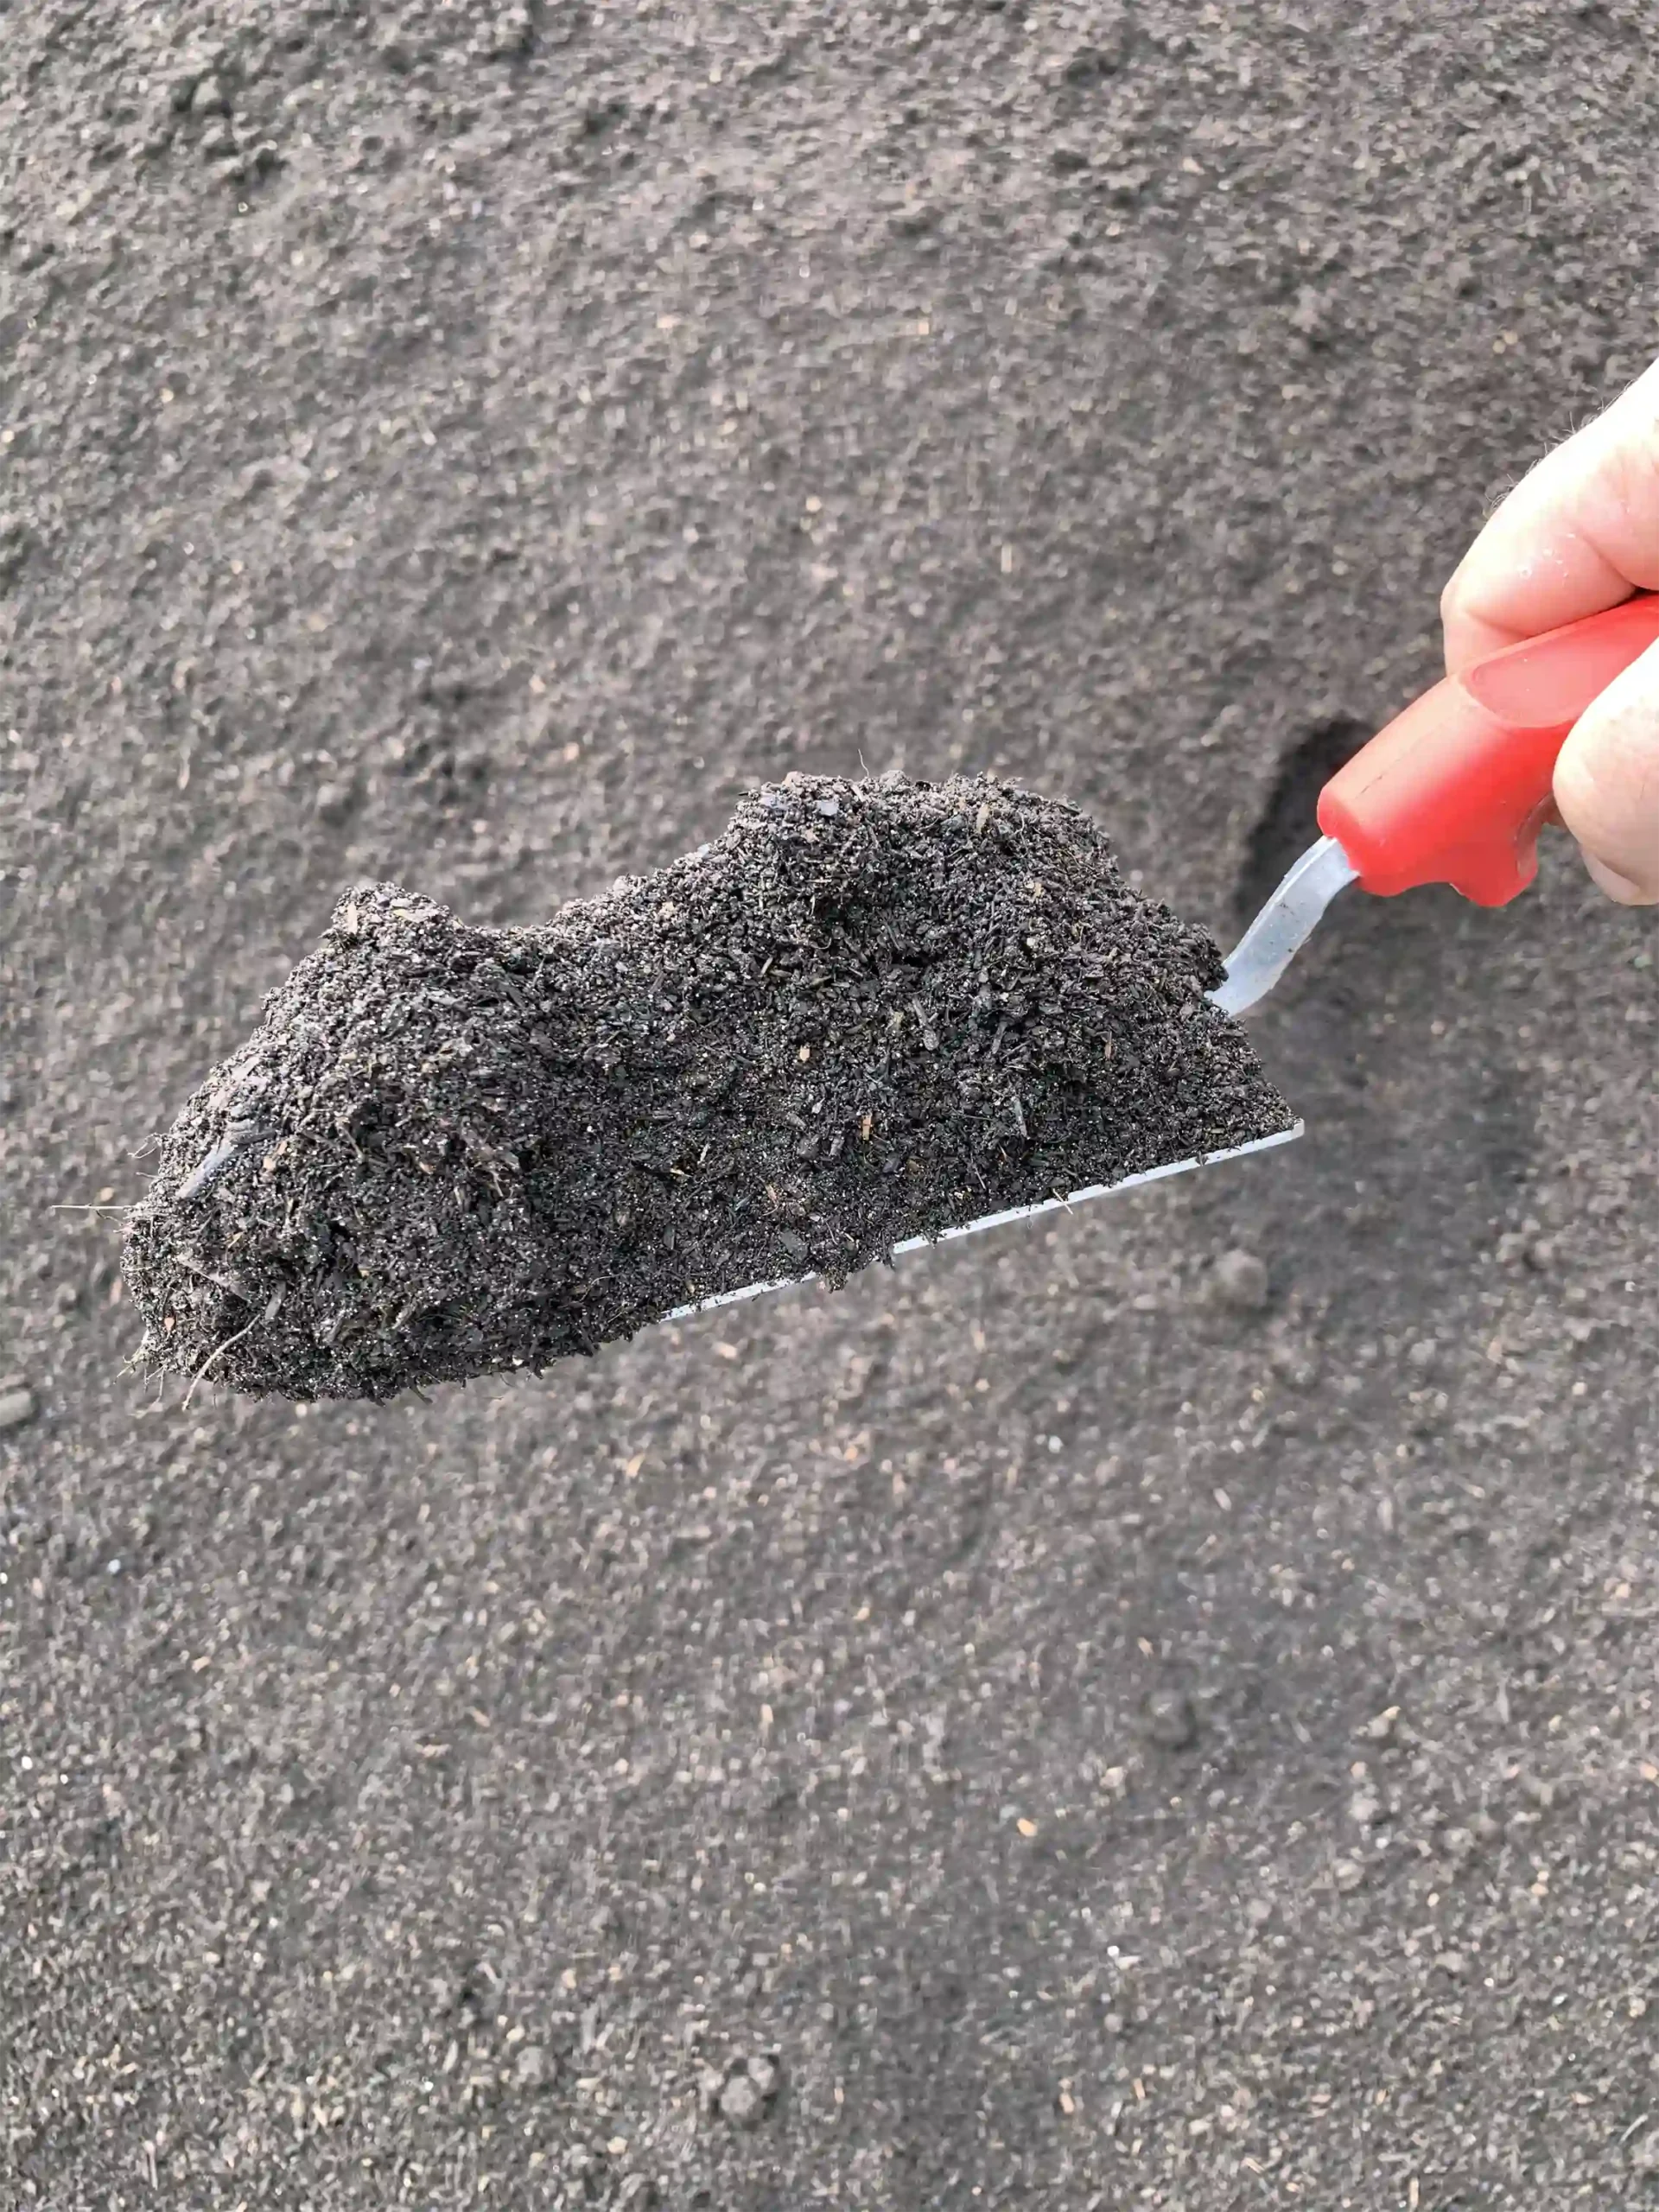 COMAND 3/8 inch Rootzone product is shown in a trowel.